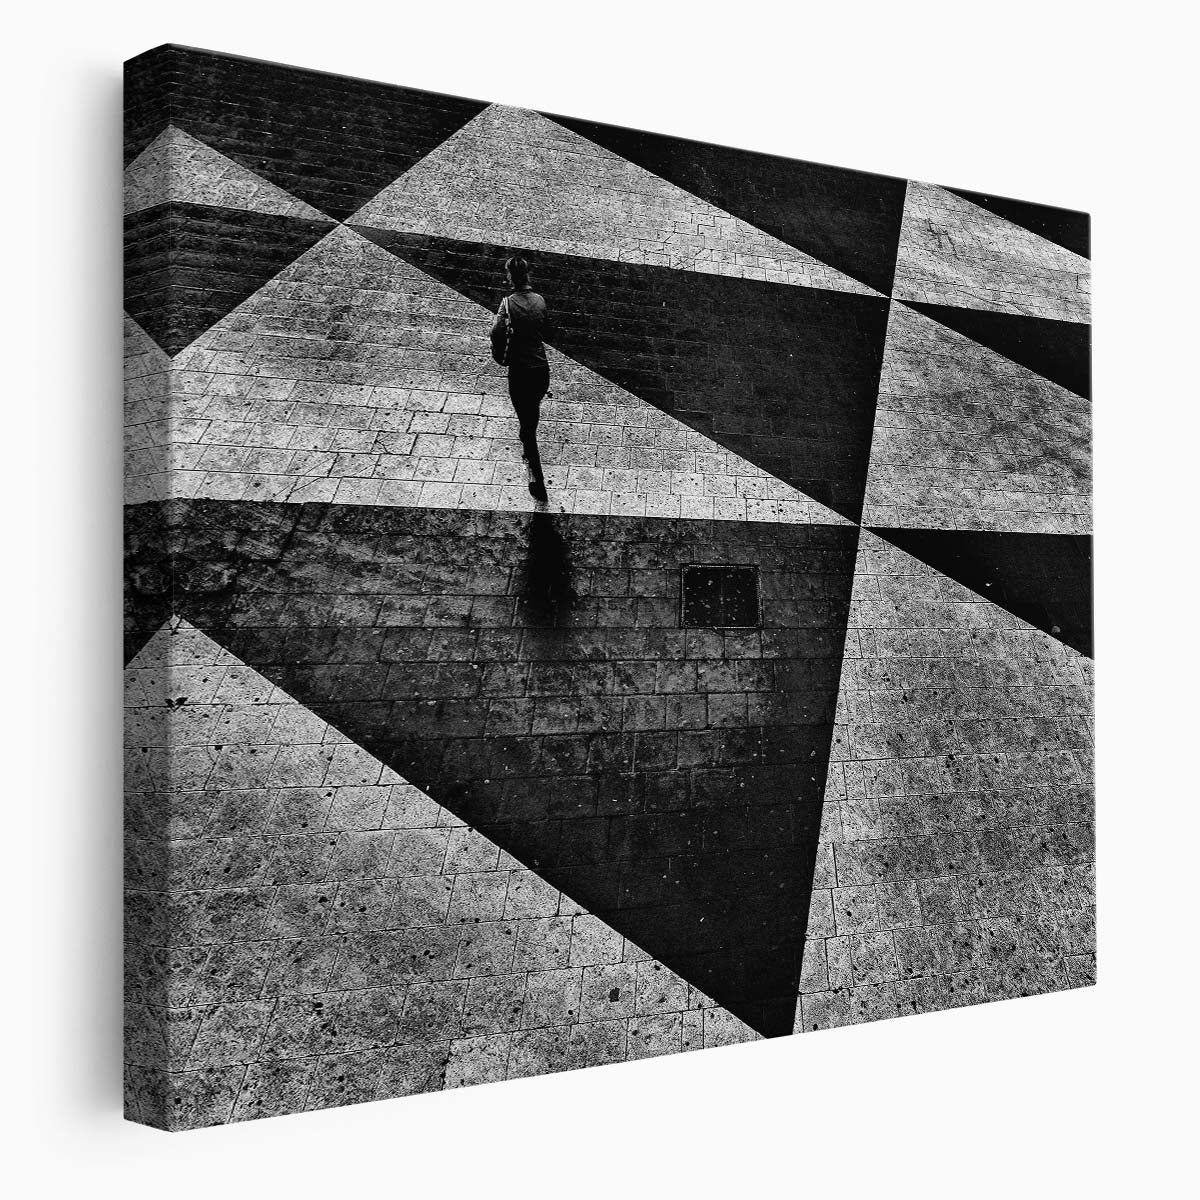 Stockholm Sergelstorg Square Monochrome Street Wall Art by Luxuriance Designs. Made in USA.